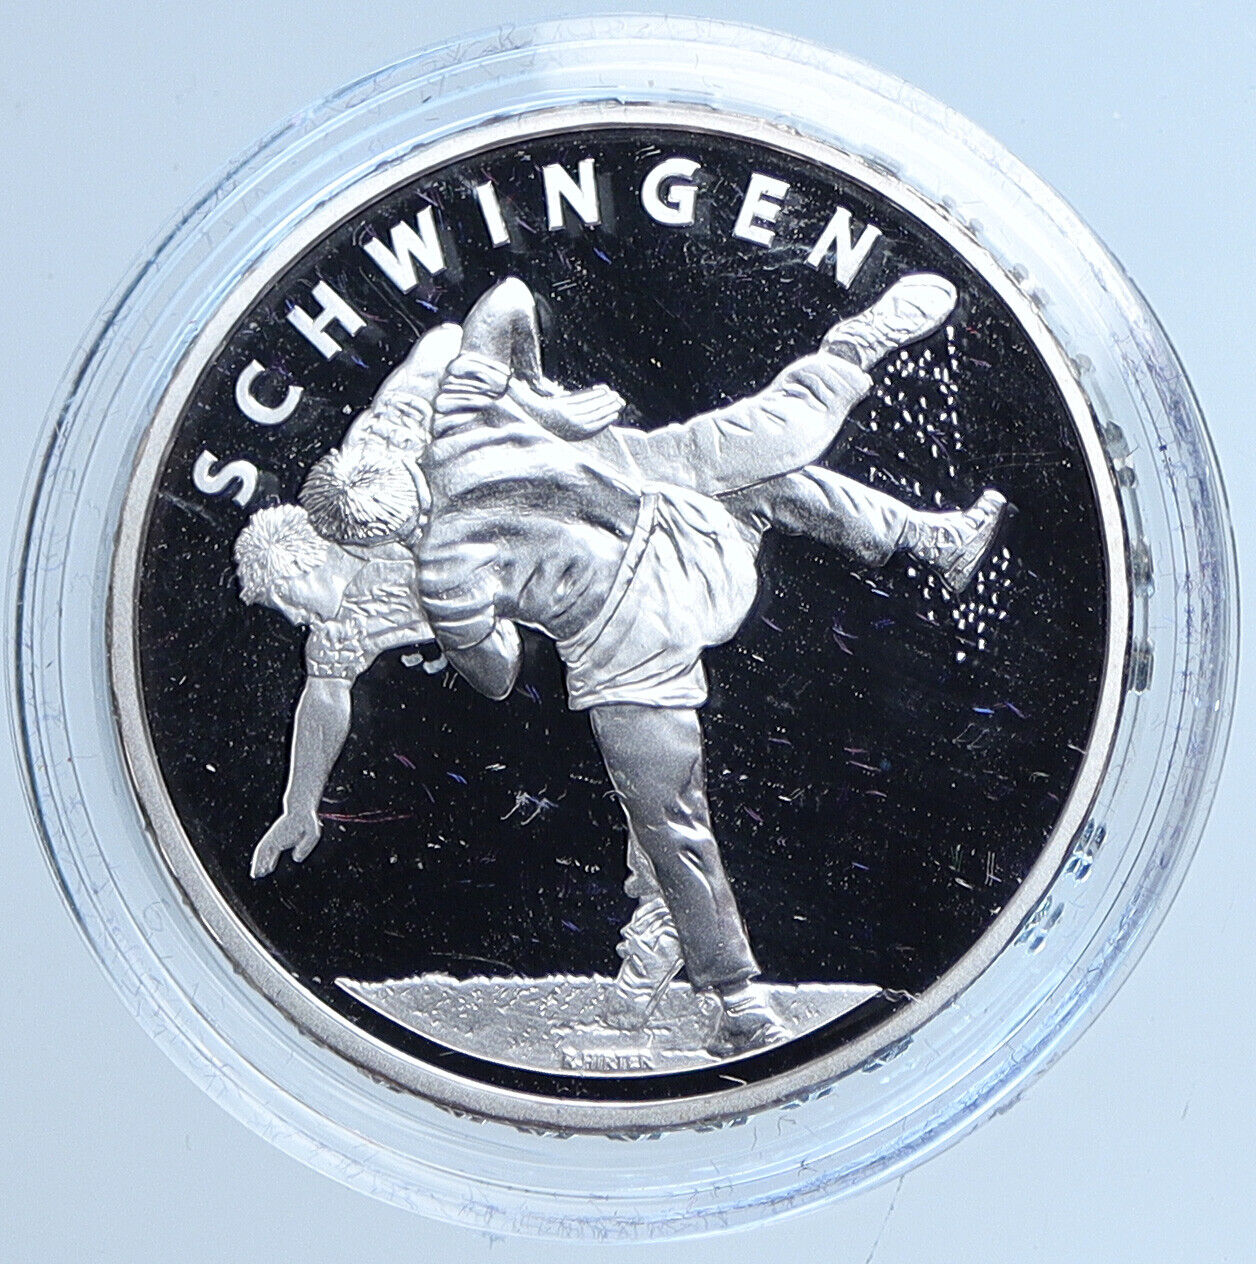 2013 Switzerland Sports SWISS WRESTLING Old Proof Silver 20 Francs Coin i113550